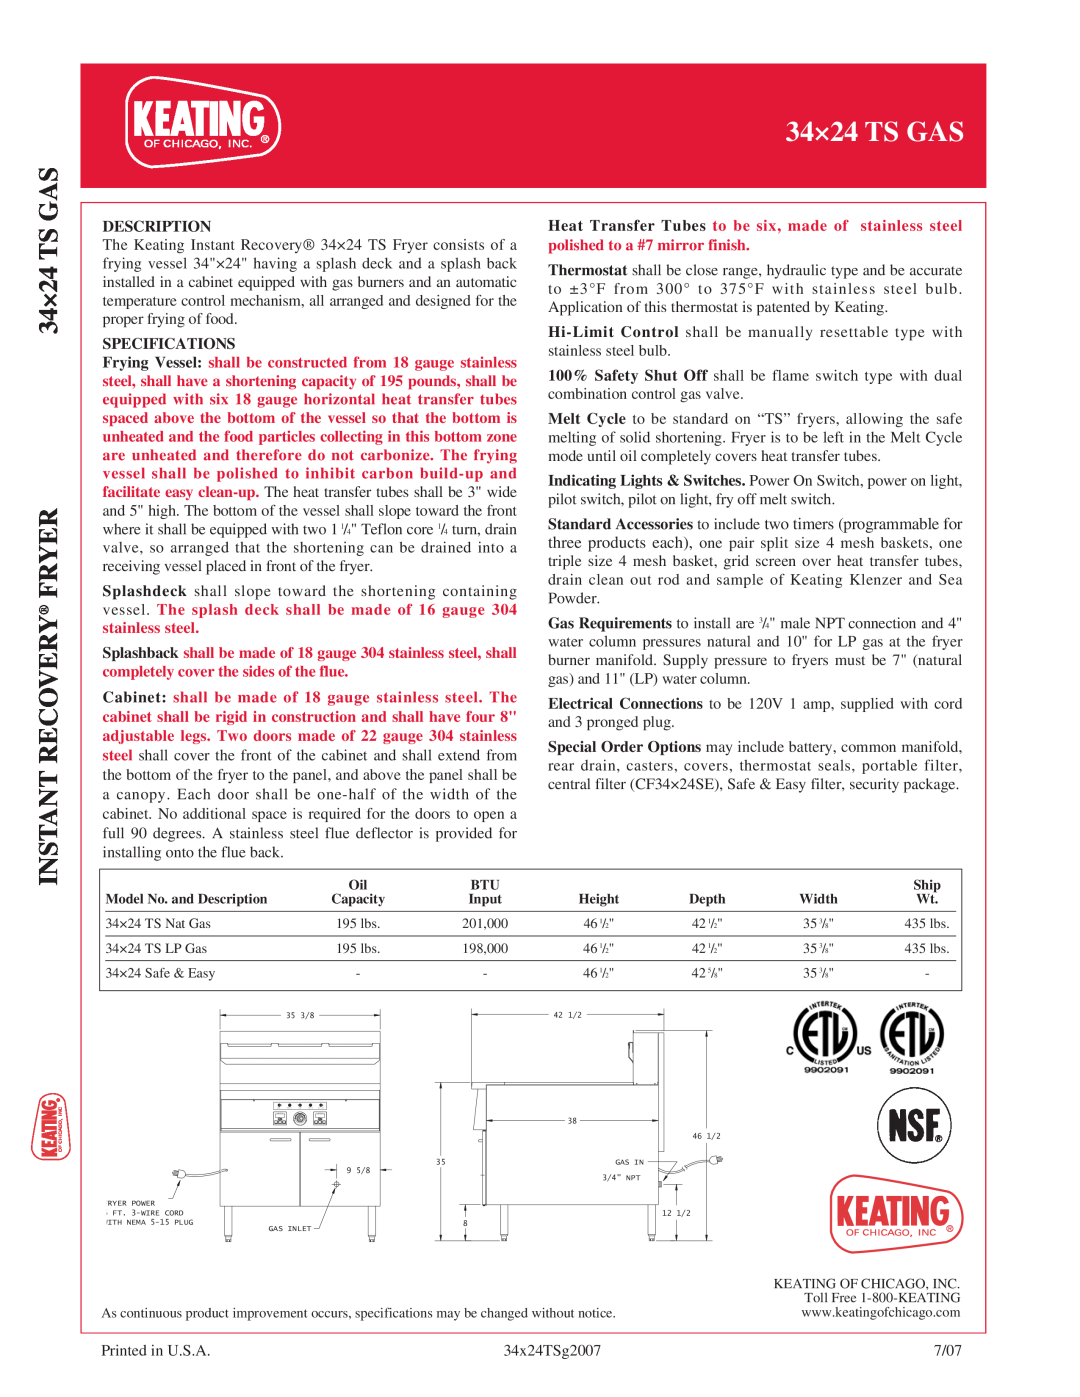 Keating Of Chicago 3424 TS GAS manual 34×24 TS GAS INSTANT RECOVERY FRYER, Description, Specifications 